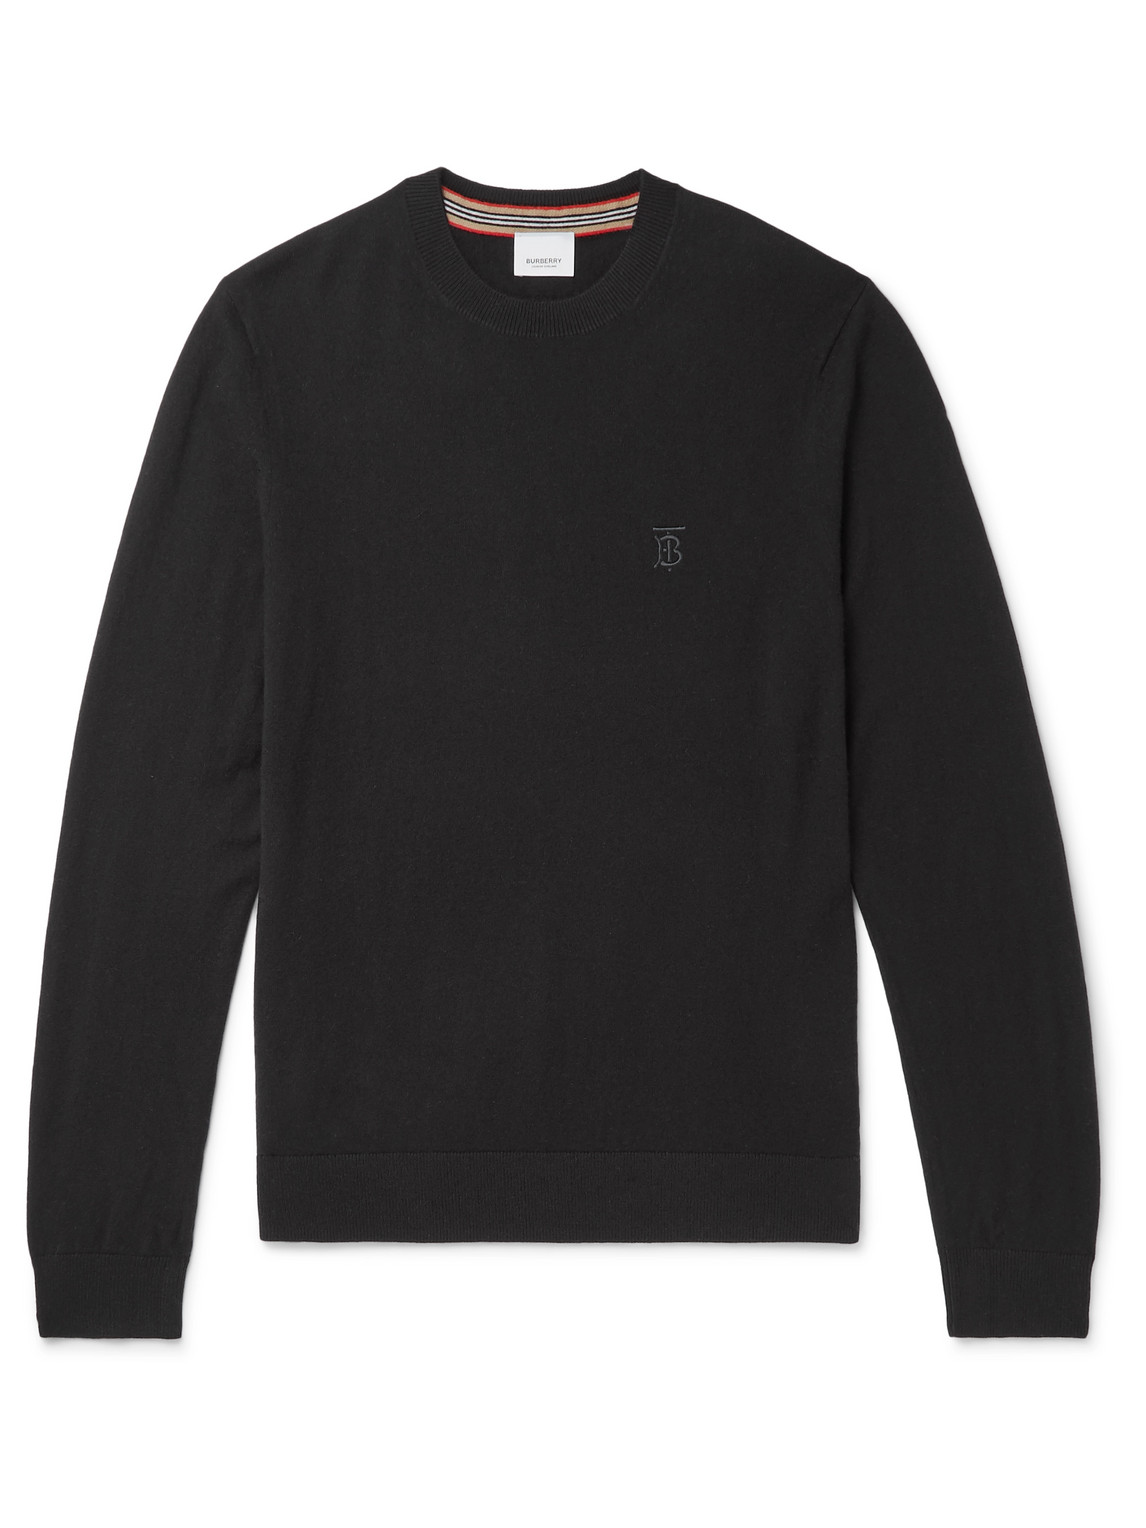 Logo-Embroidered Cashmere Sweater